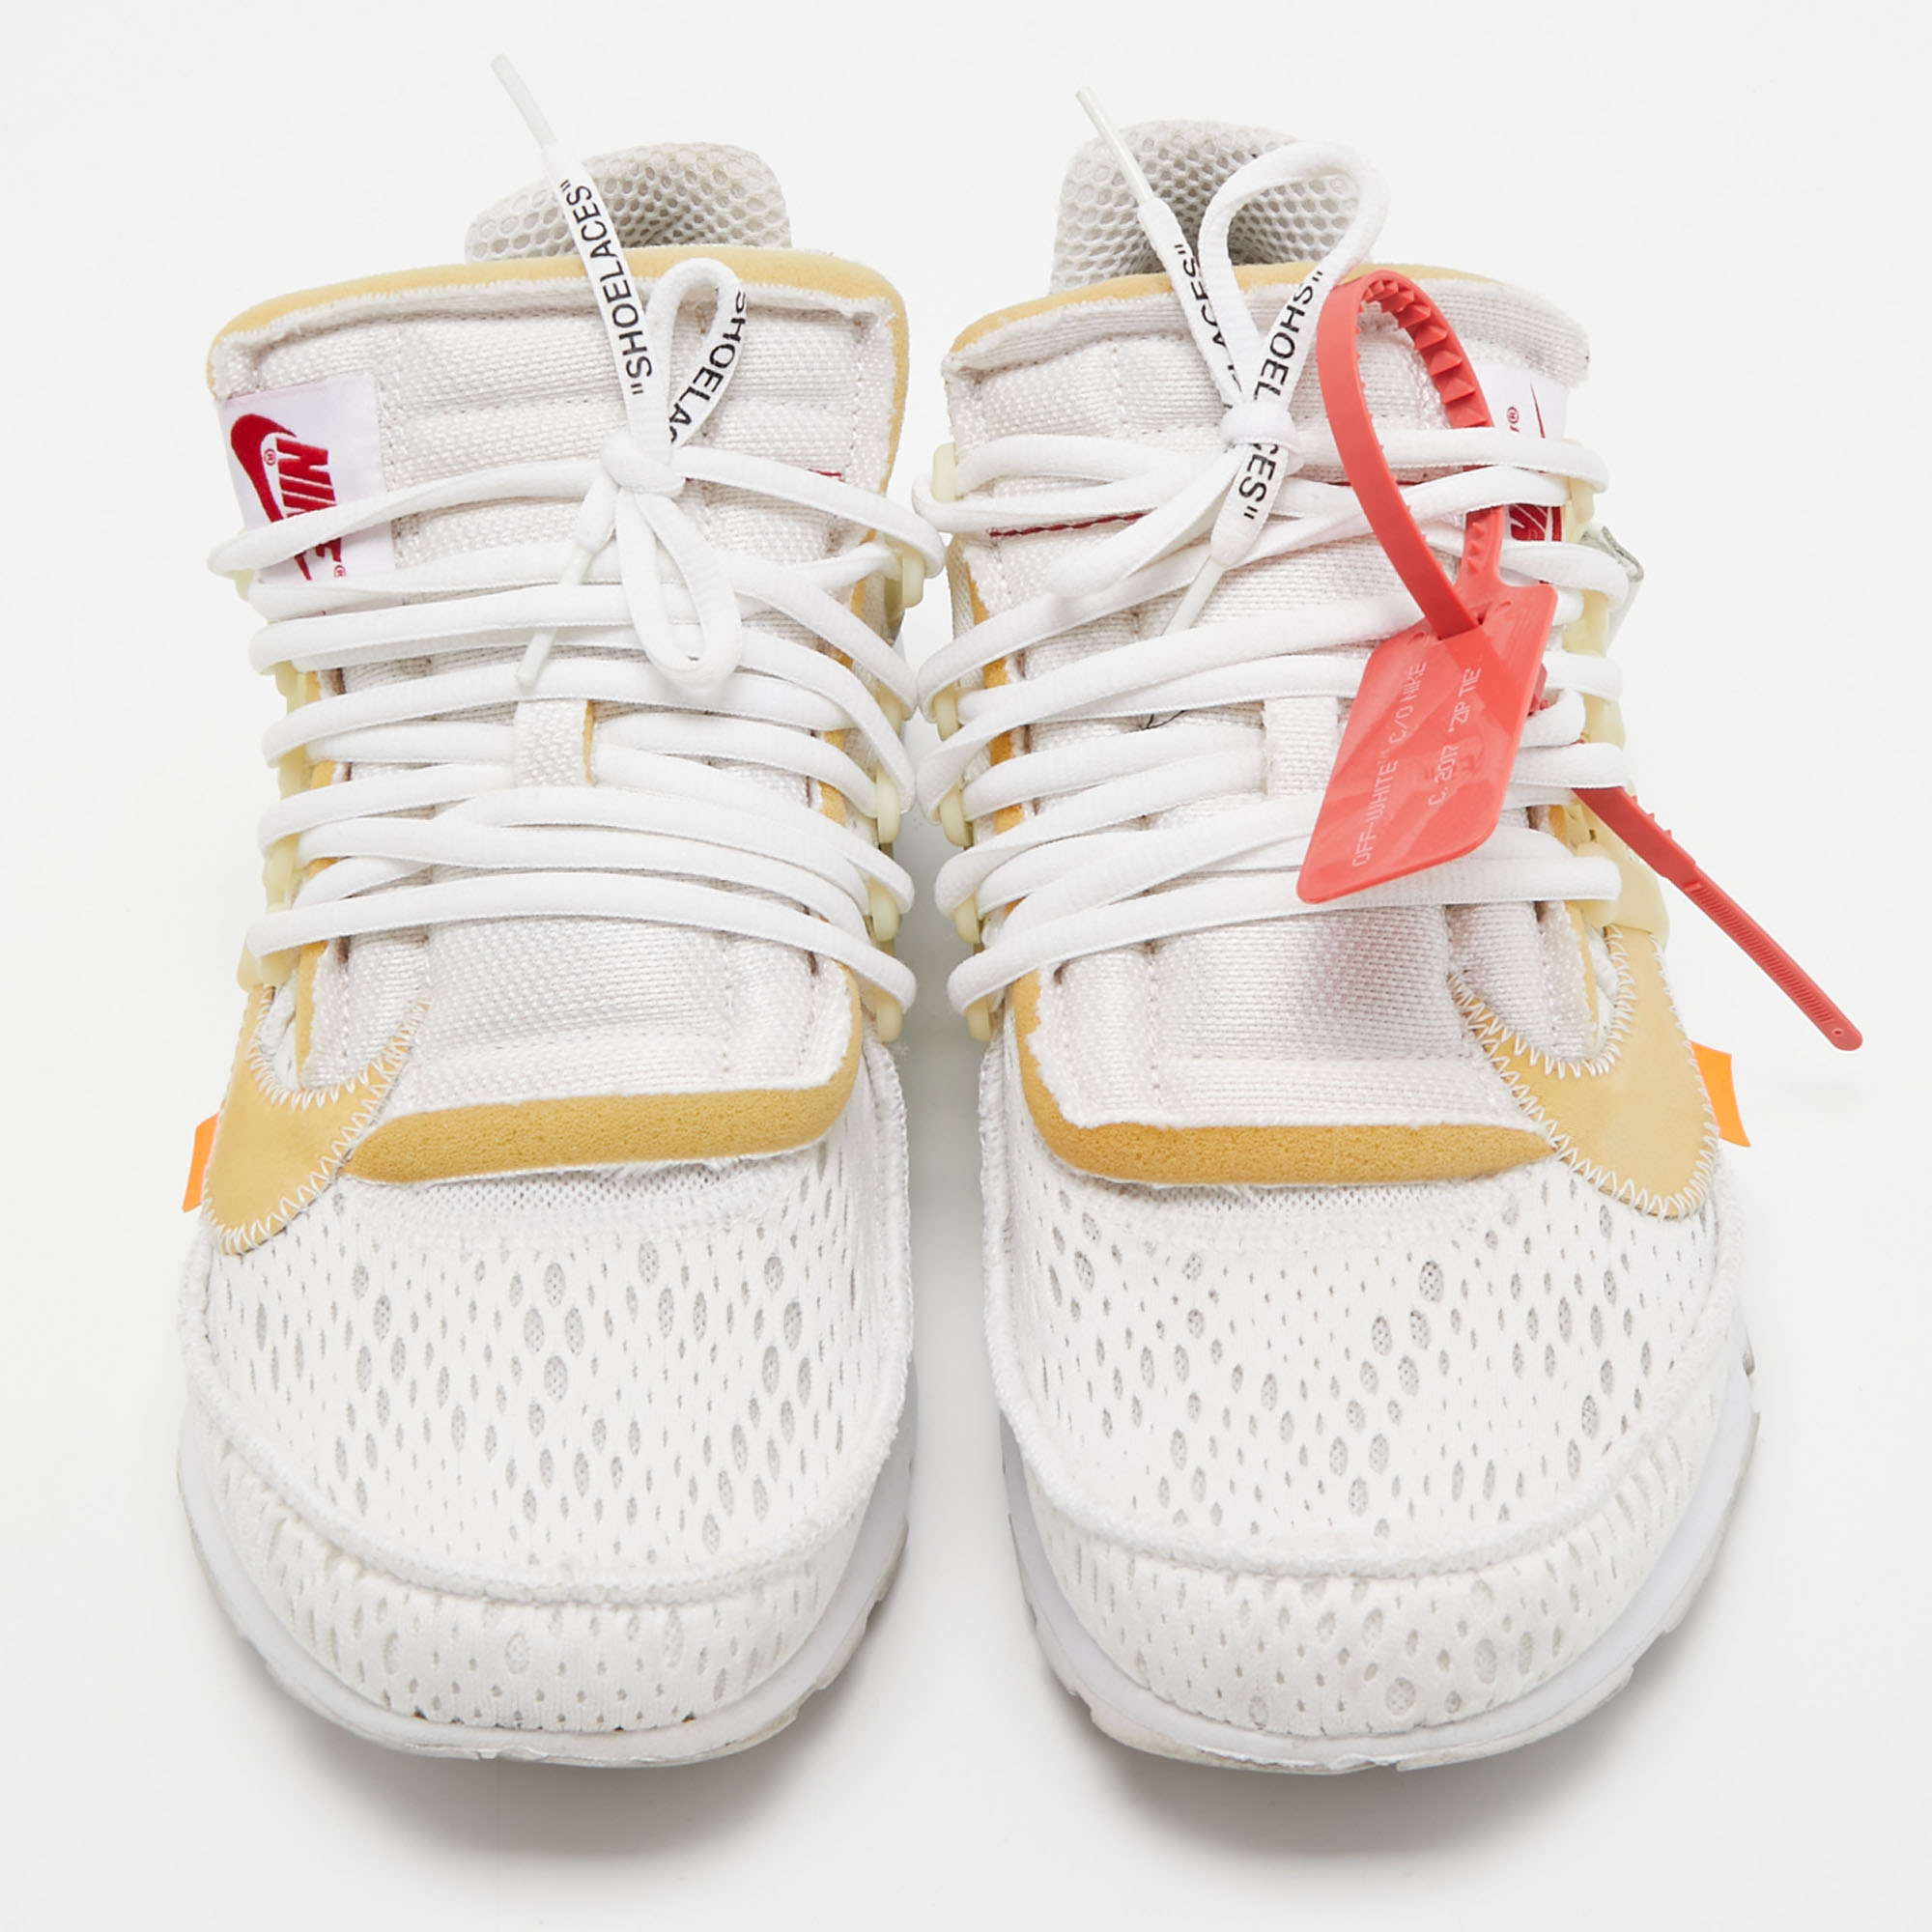 Nike X Off White  White Fabric Air Presto Low Trainers Sneakers Size 42.5